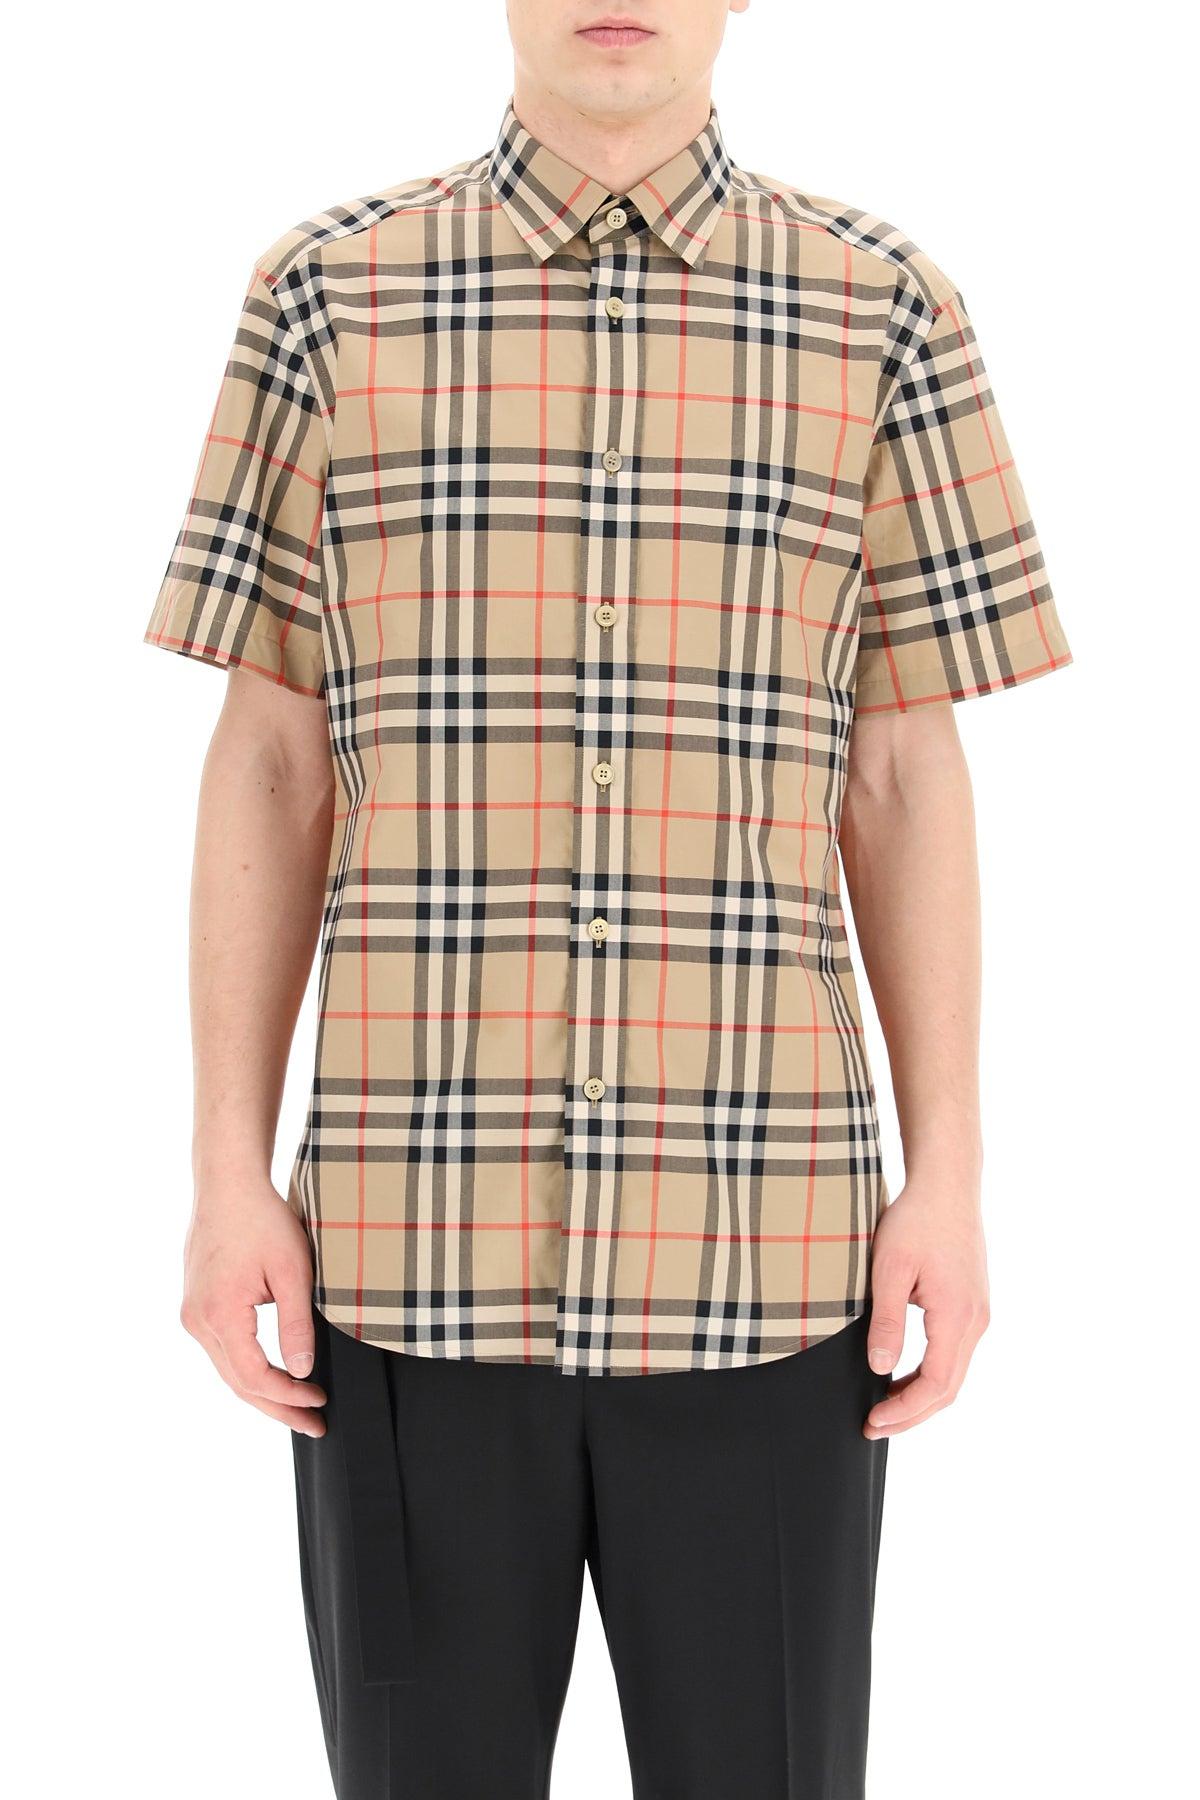 Burberry Synthetic Vintage Check Short-sleeved Twill Shirt in Beige  (Natural) for Men - Save 40% - Lyst